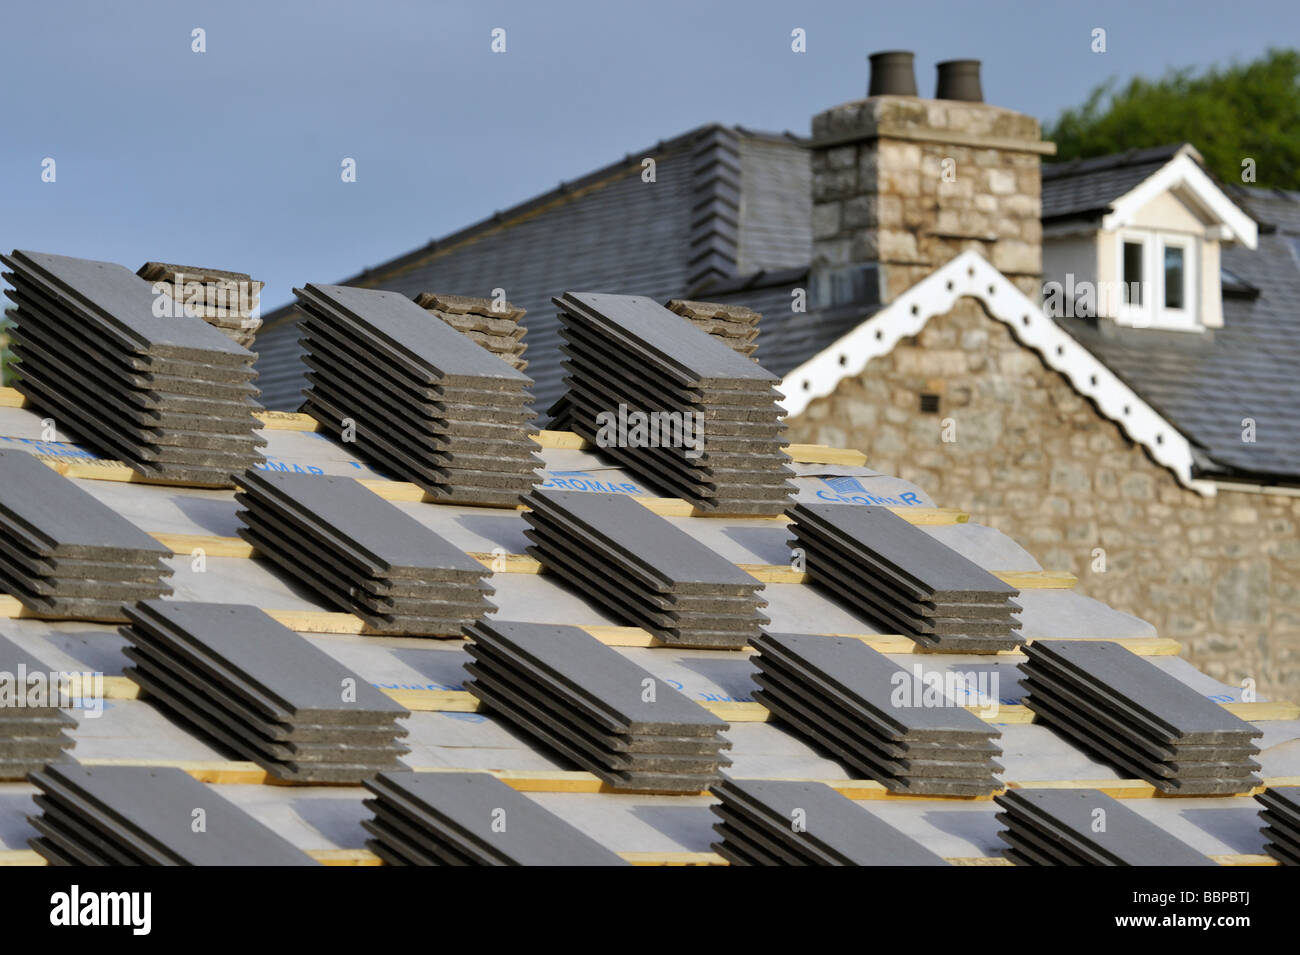 Roofing slates, stacked on roof, prior to re-roofing house. Stock Photo